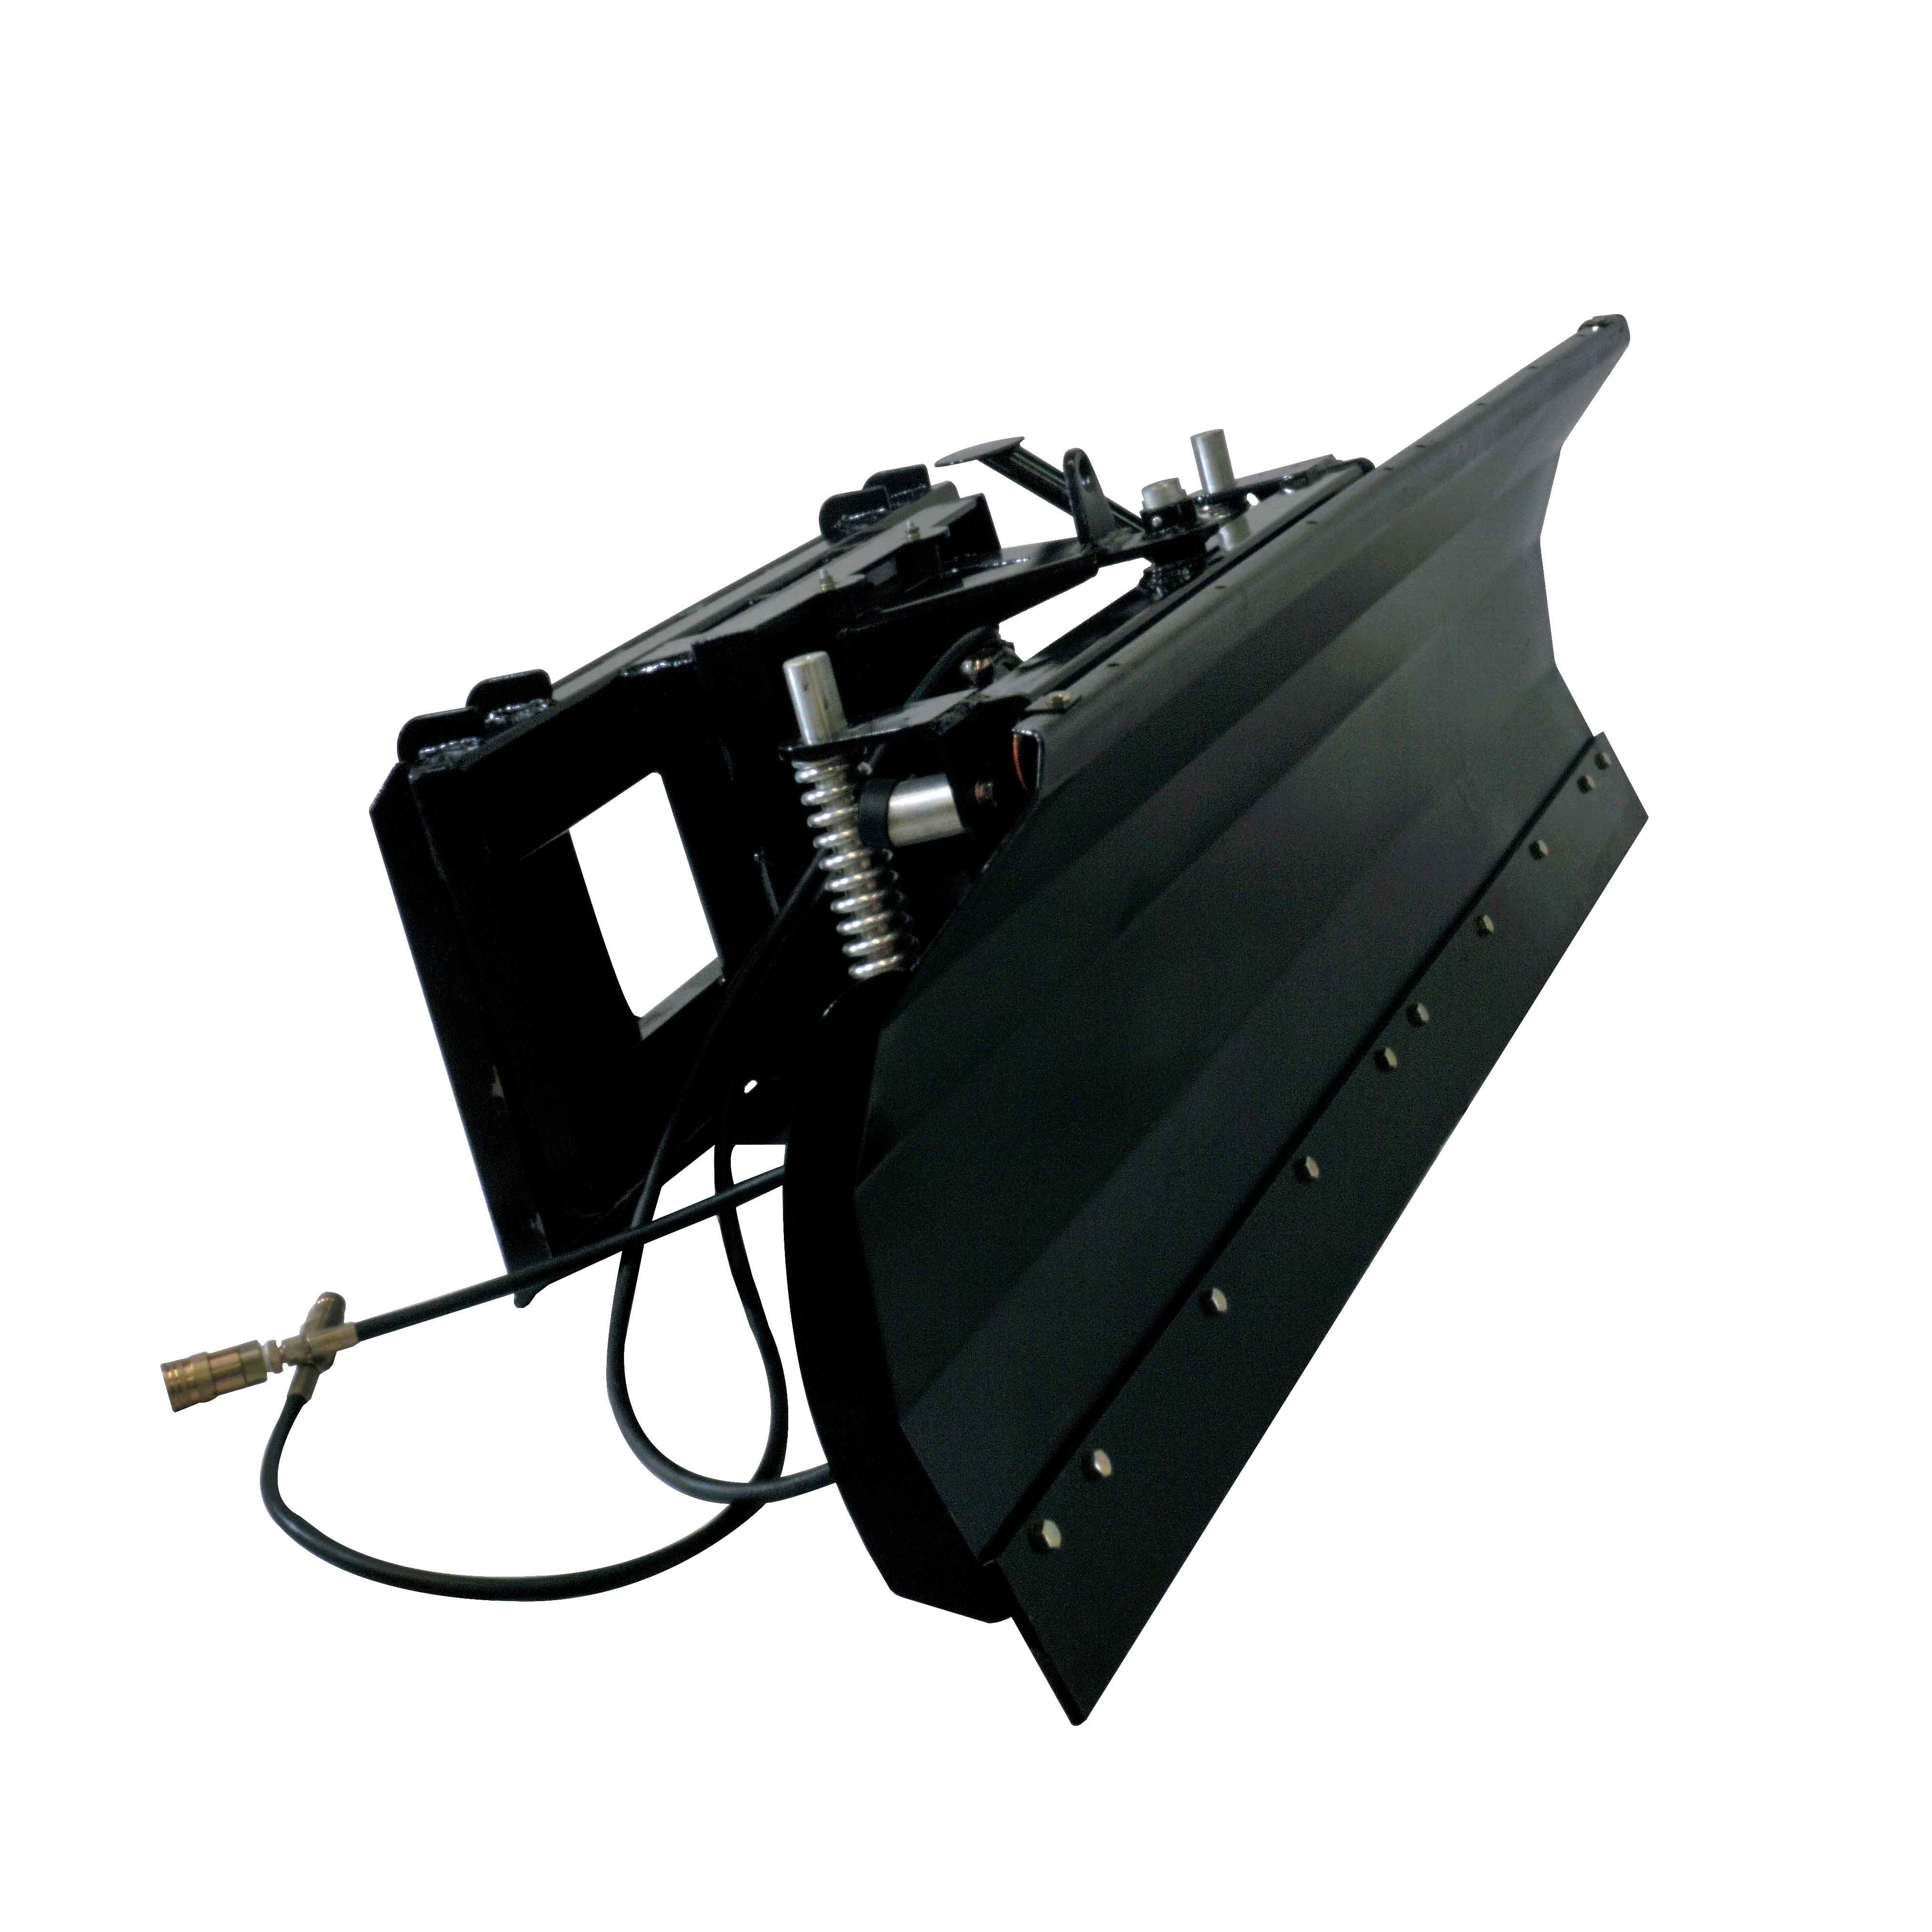 Hydraulic Wood Chipper for Skid Steers and Tractors with Universal Quick Tach 4”x10” Titan Distributors Inc